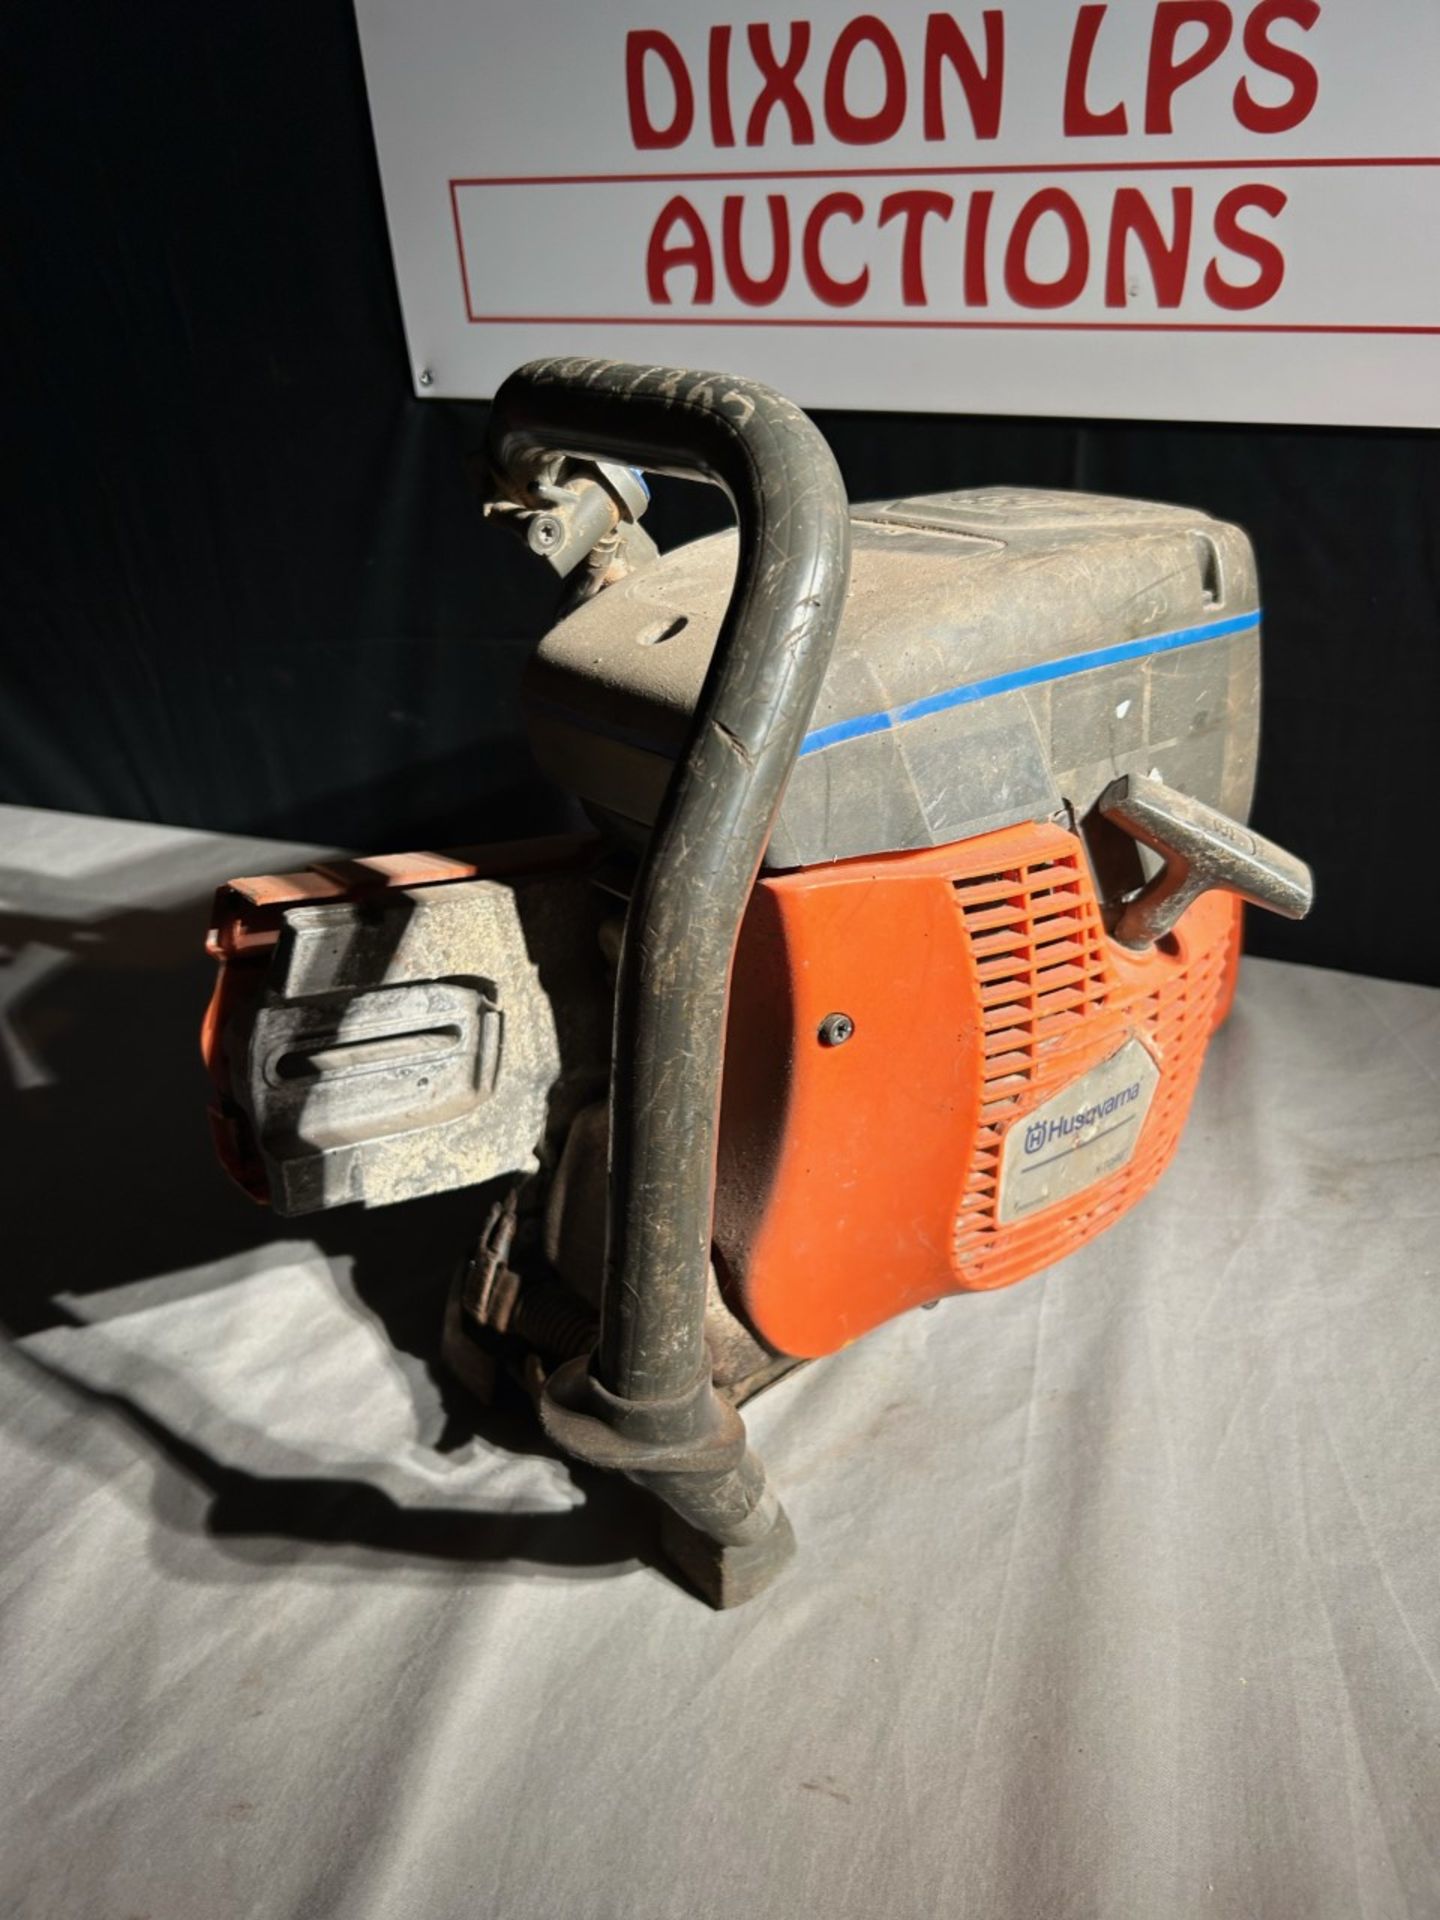 Husqvarna k770. Selling as non runner as it needs blade guard end and belt - Image 2 of 2